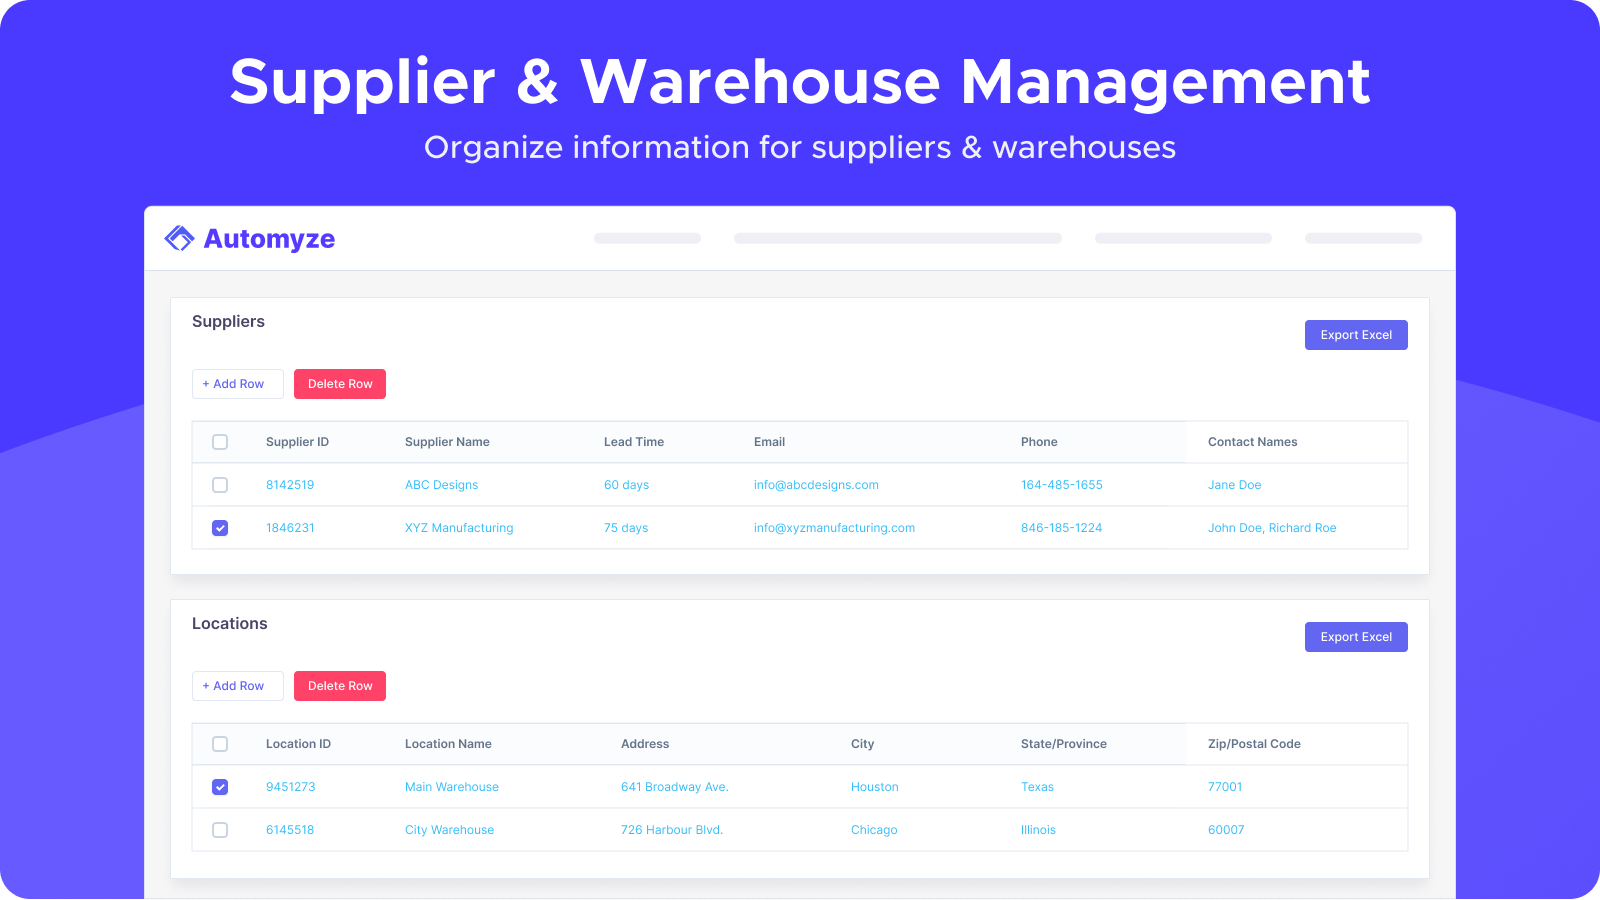 Organize information for suppliers & warehouses